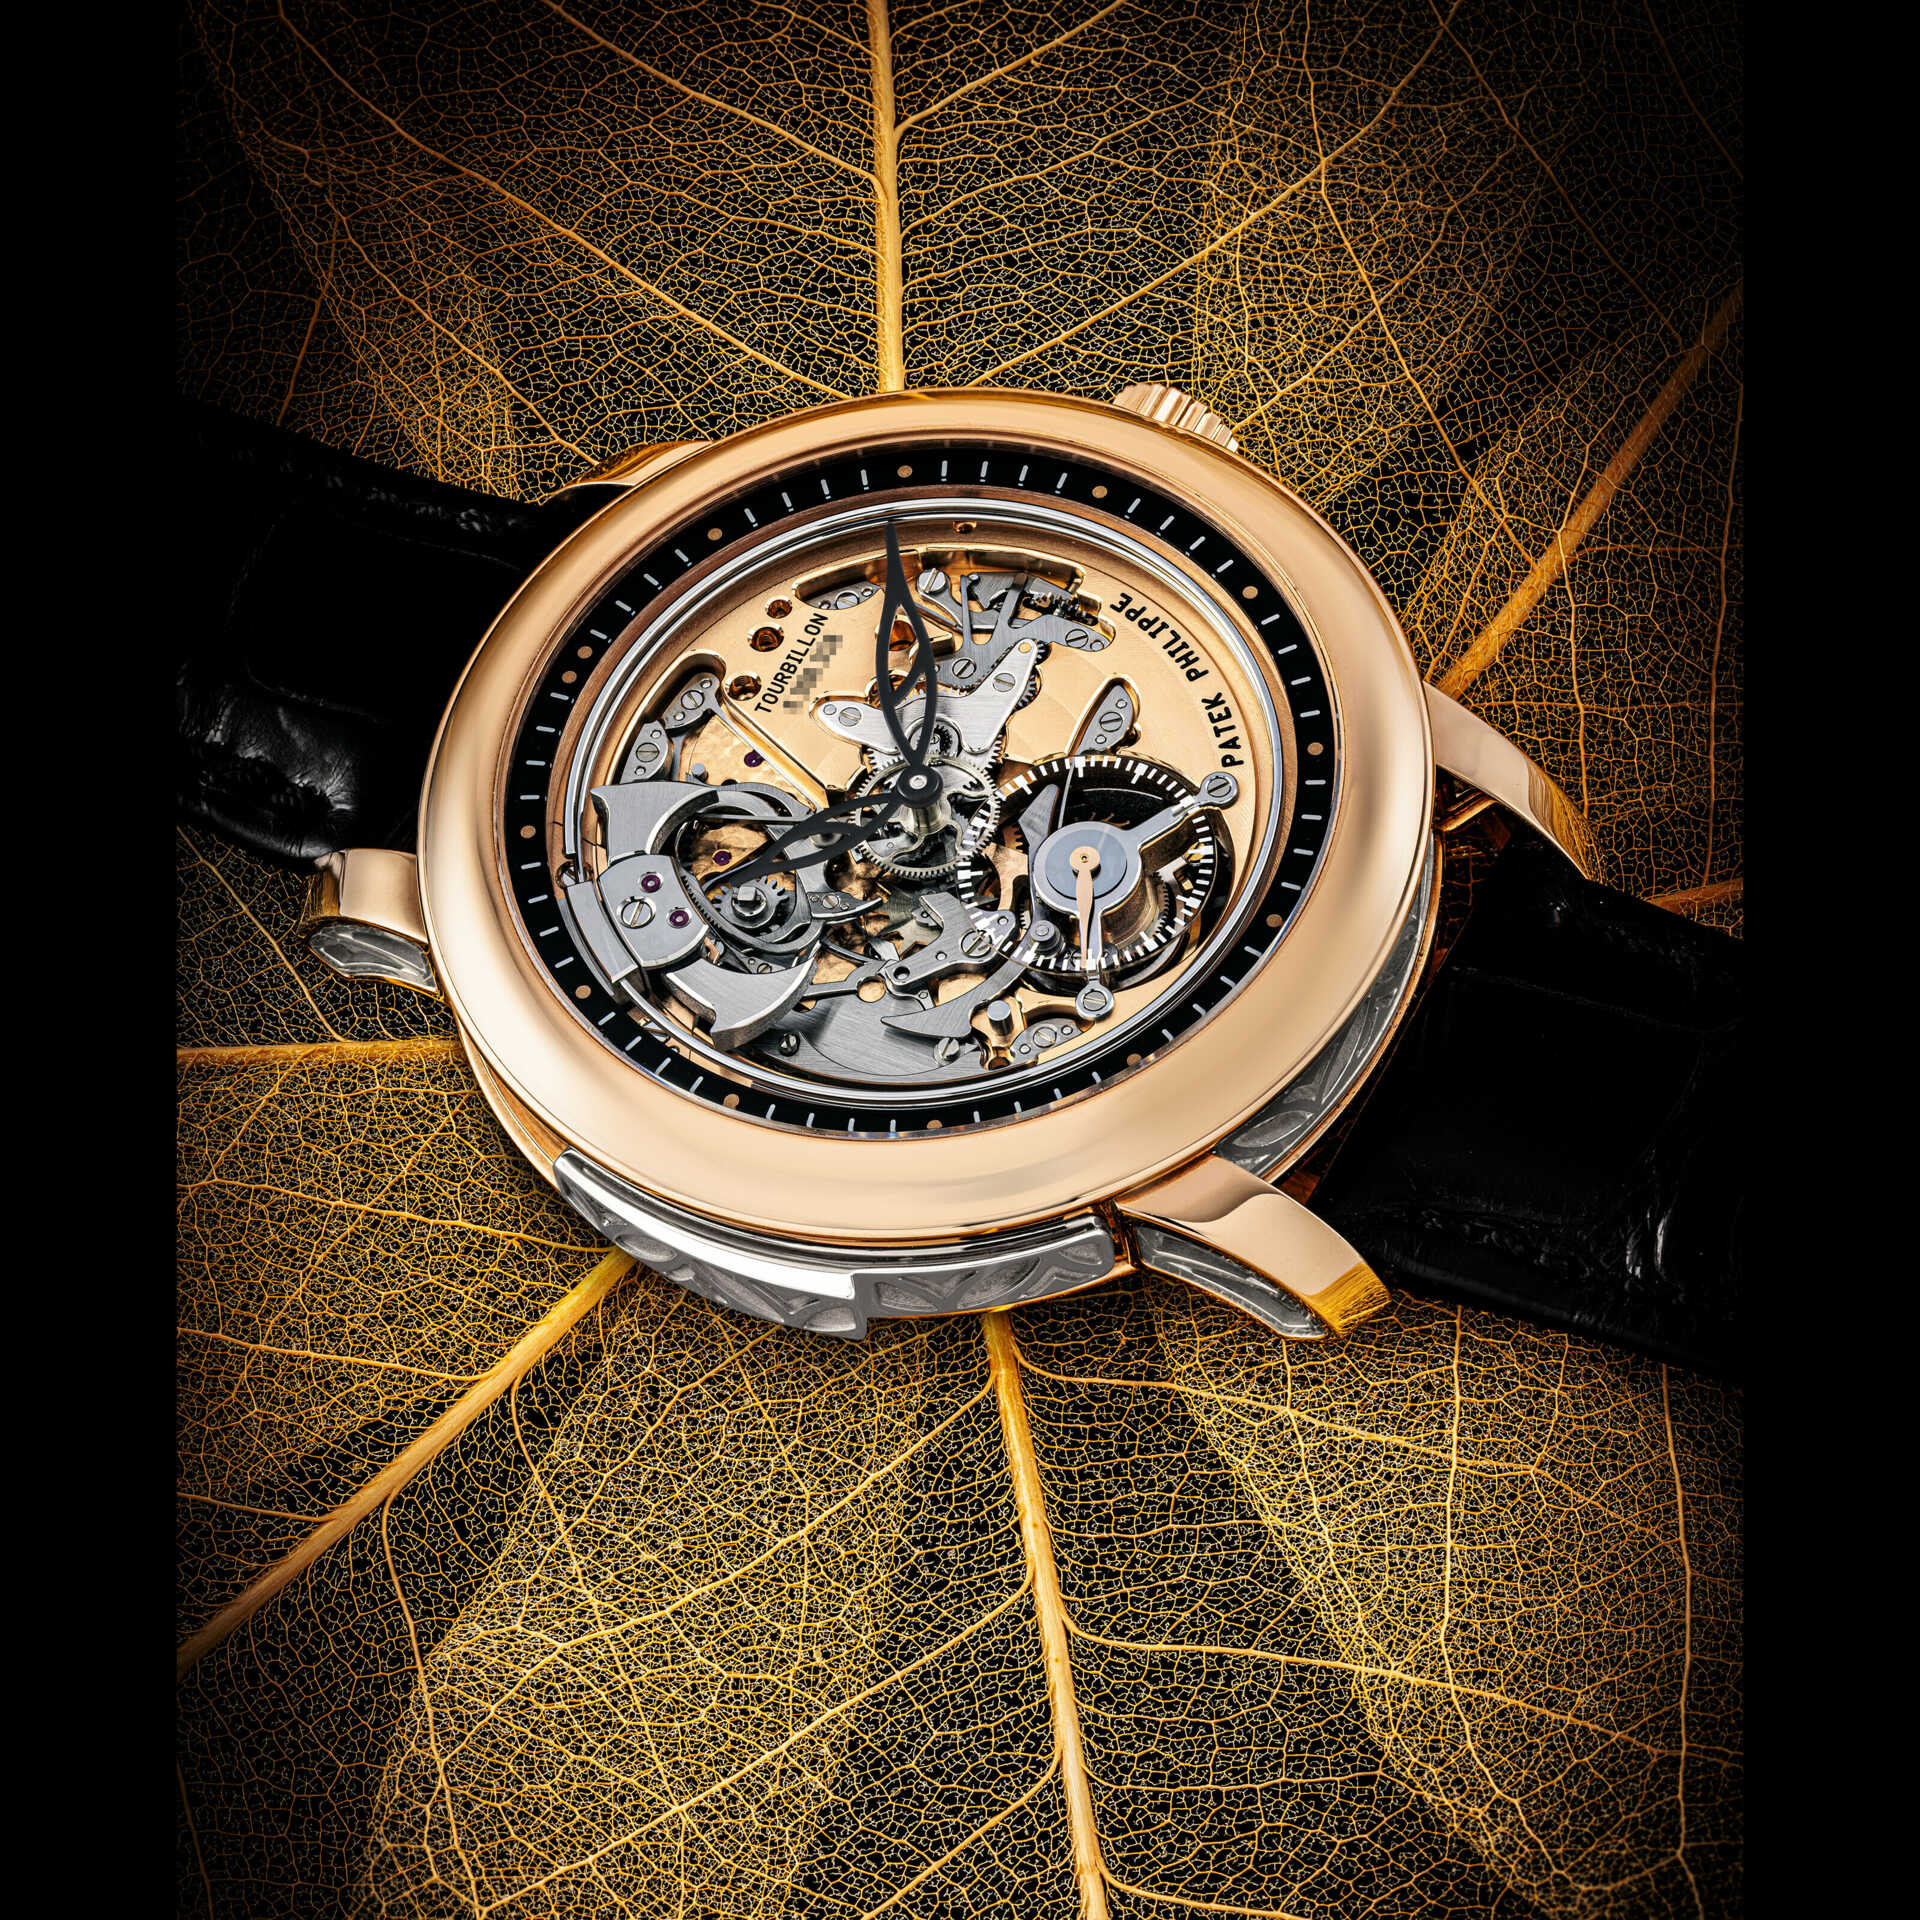 PATEK PHILIPPE. AN EXECEPTIONALLY RARE 18K PINK GOLD SEMI-SKELETONISED MINUTE REPEATING TOURBILLON WRISTWATCH